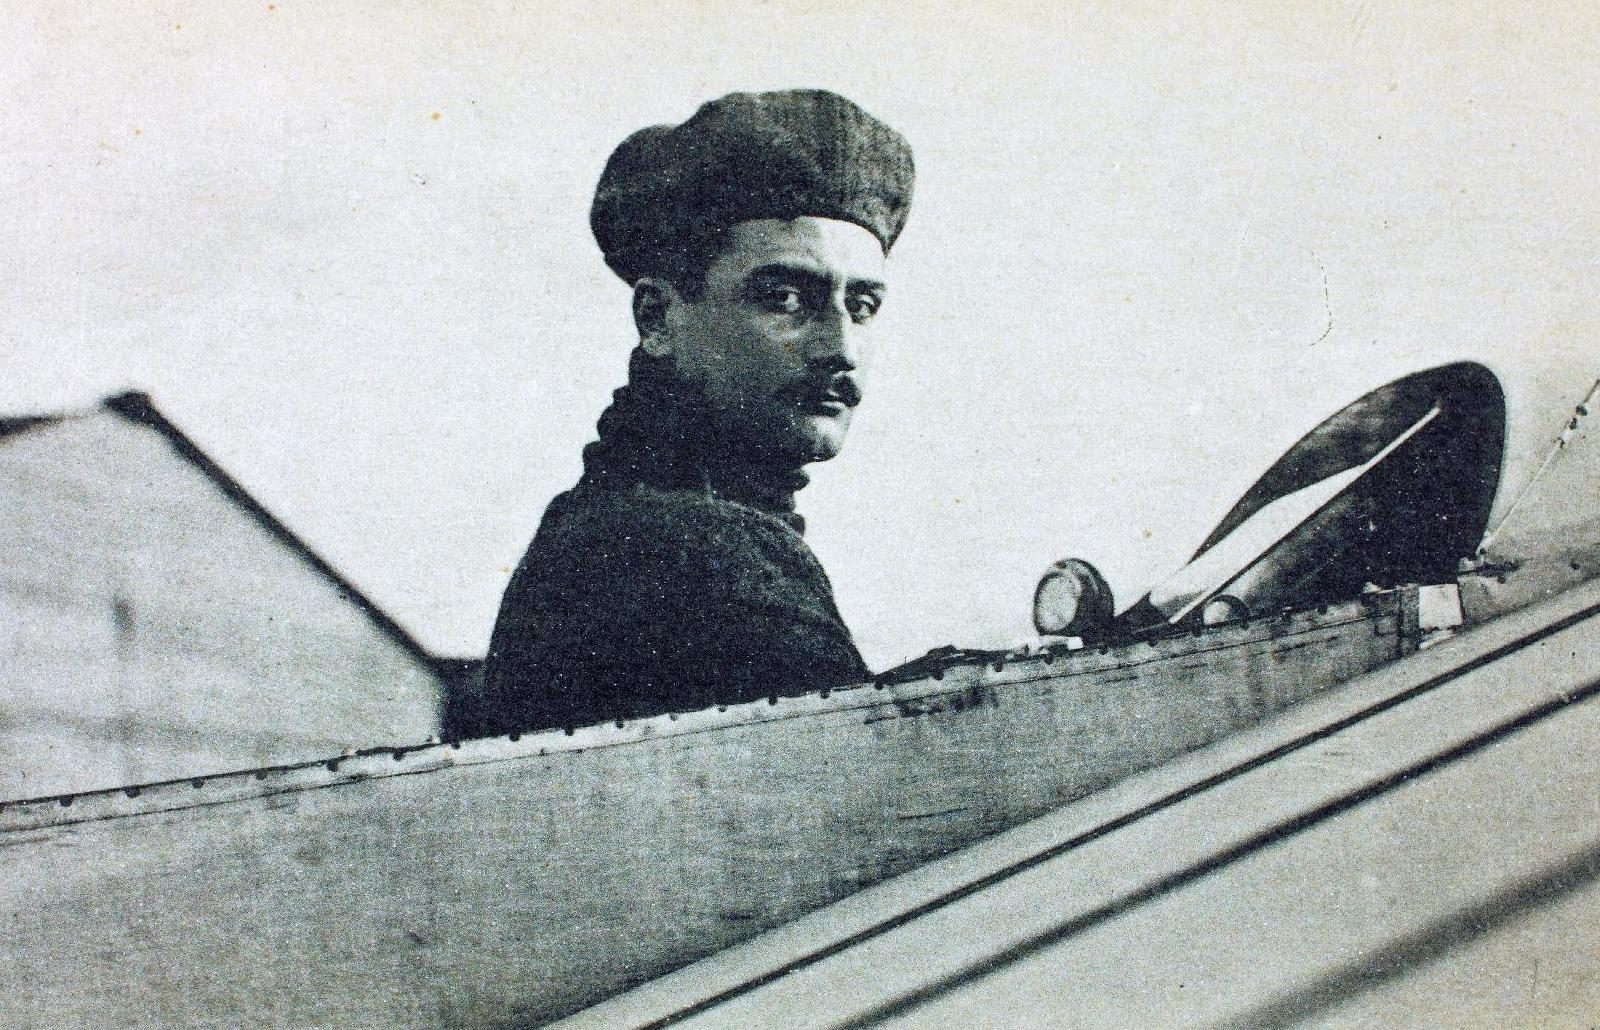 Bust and head of Roland Garros emerging from open cockpit of aircraft, looking at viewer